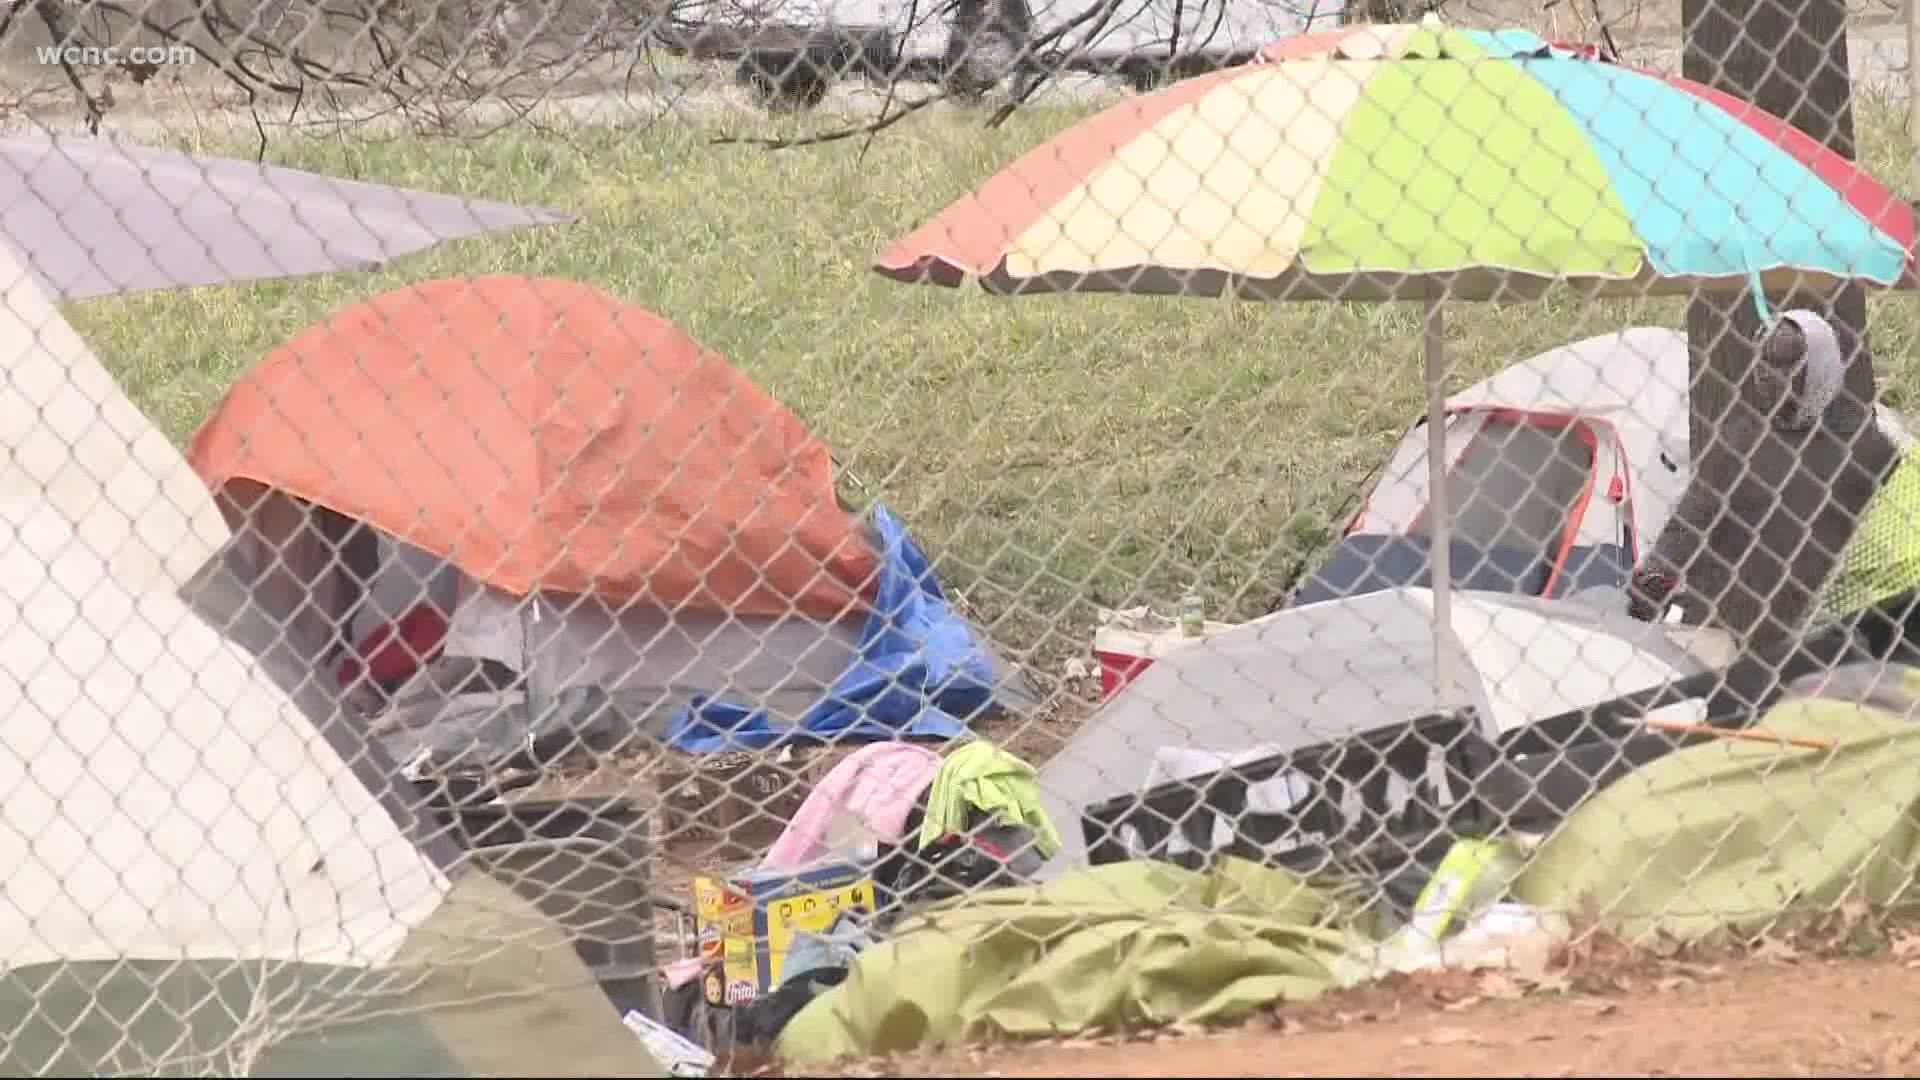 Mecklenburg County held a virtual town hall Thursday evening to address the homelessness issue that has become more visible during the pandemic.